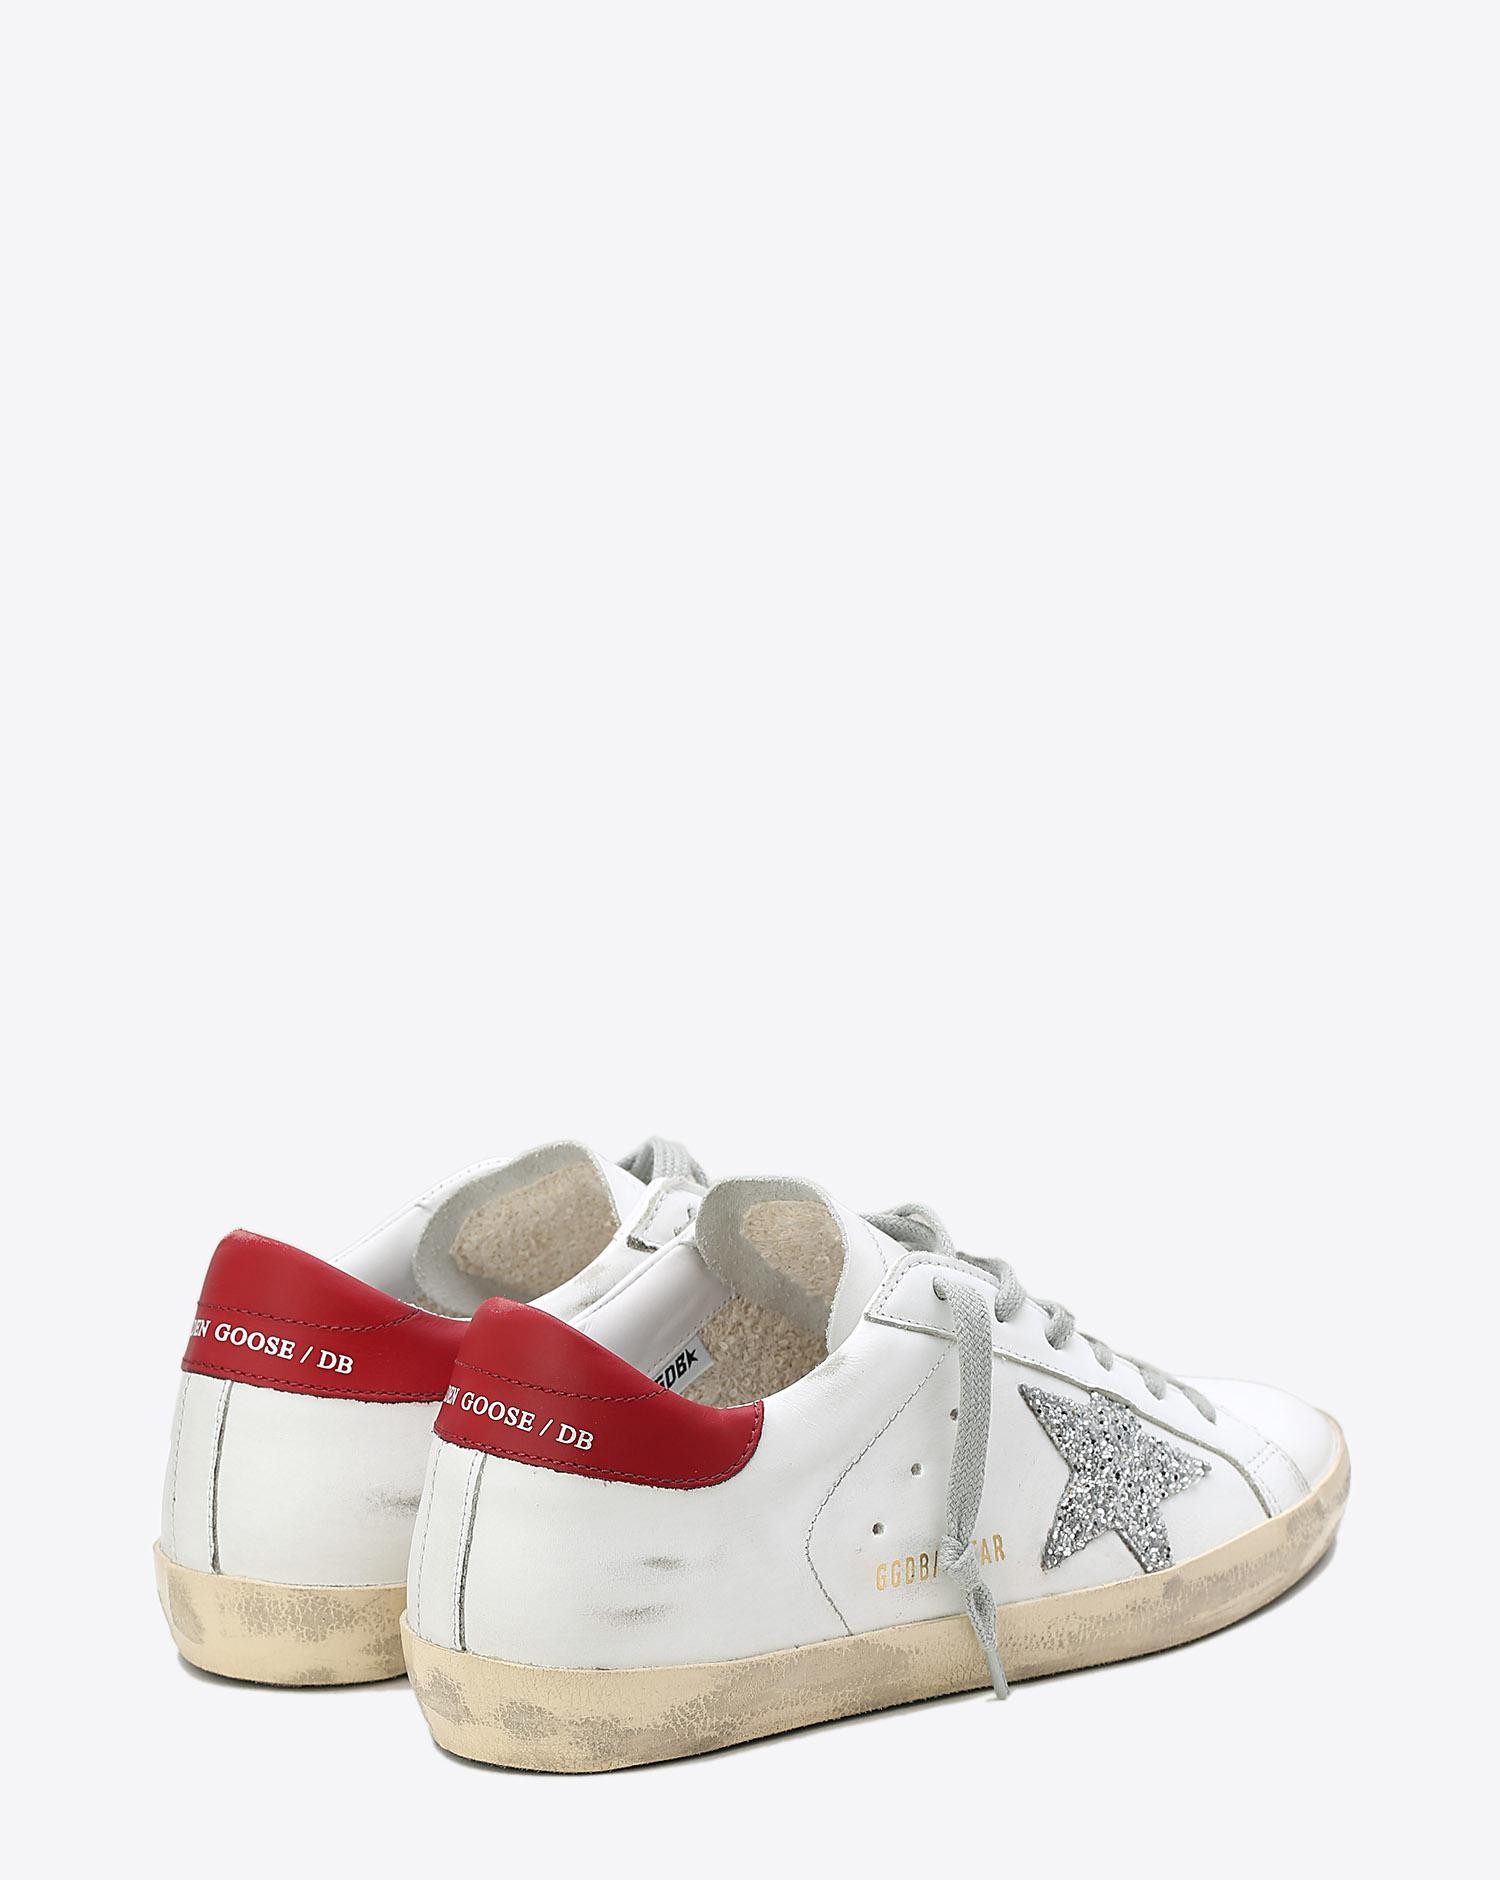 Golden Goose Woman Pré-Collection Sneakers Superstar WhiteRed - Silver Glitter   